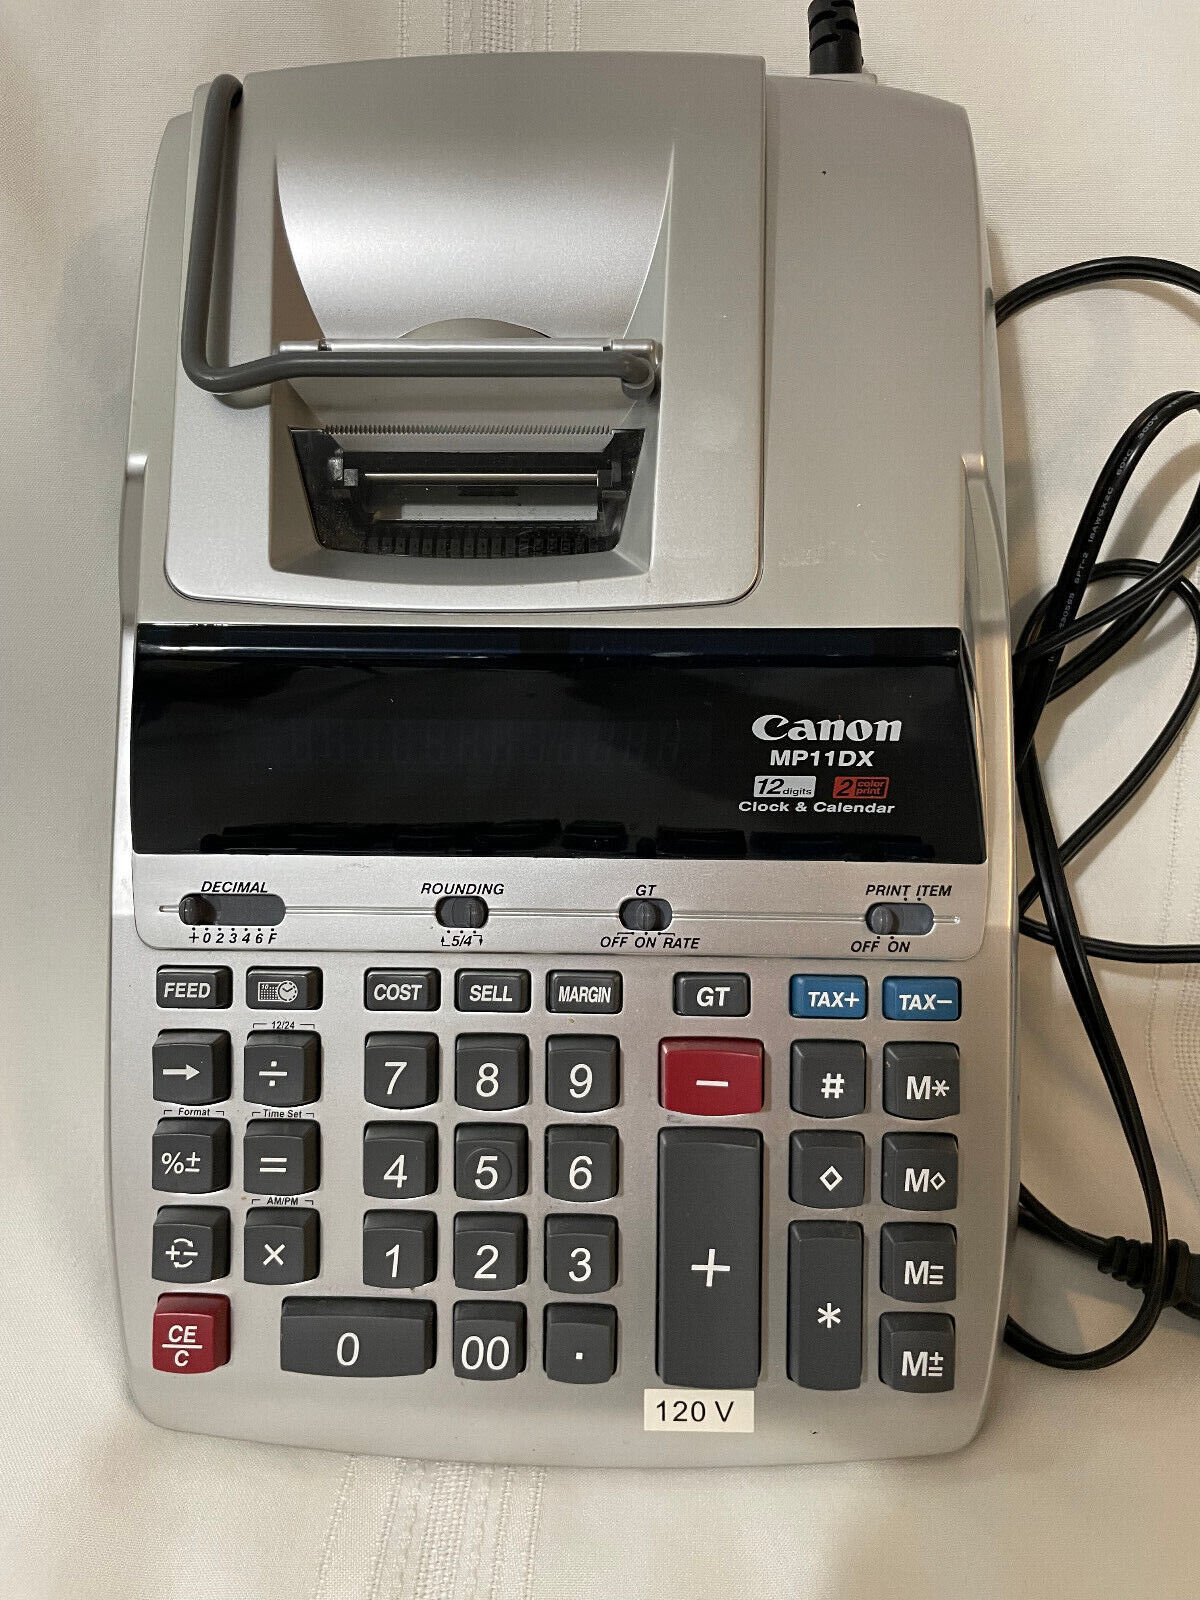 Canon MP11DX Printing Calculator with Clock and Calendar for Sale